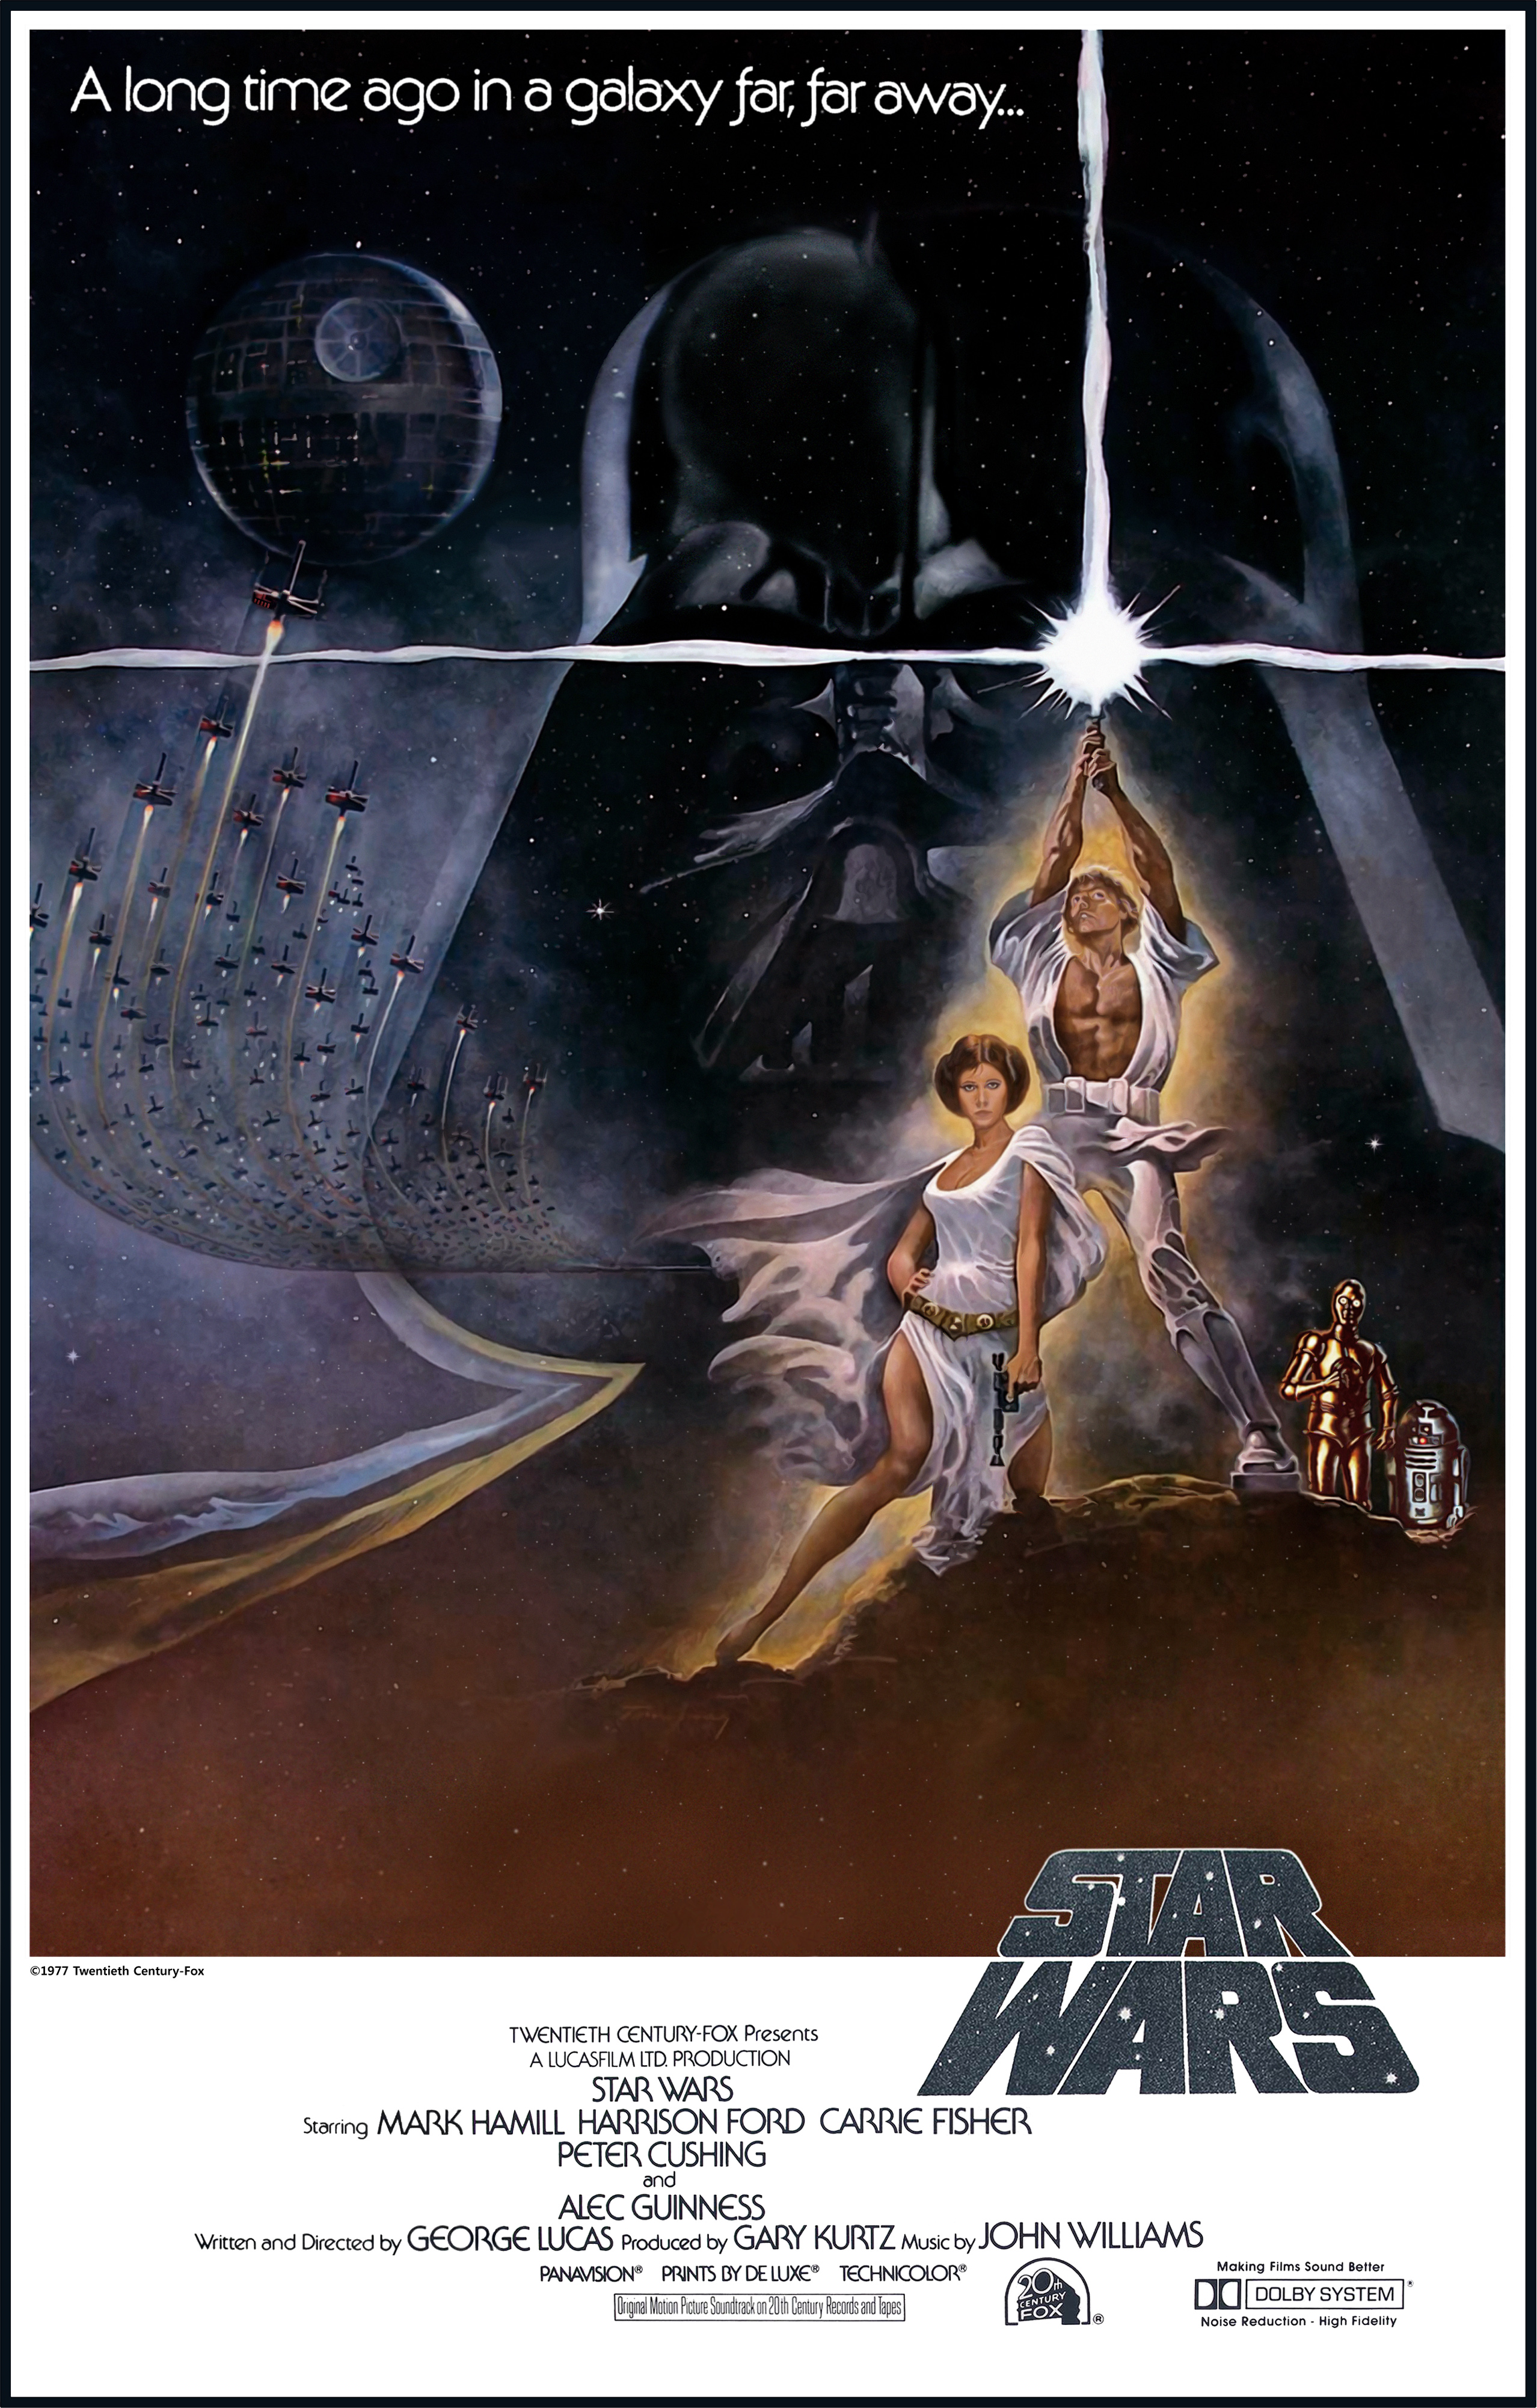 Star Wars - Style A, 1977